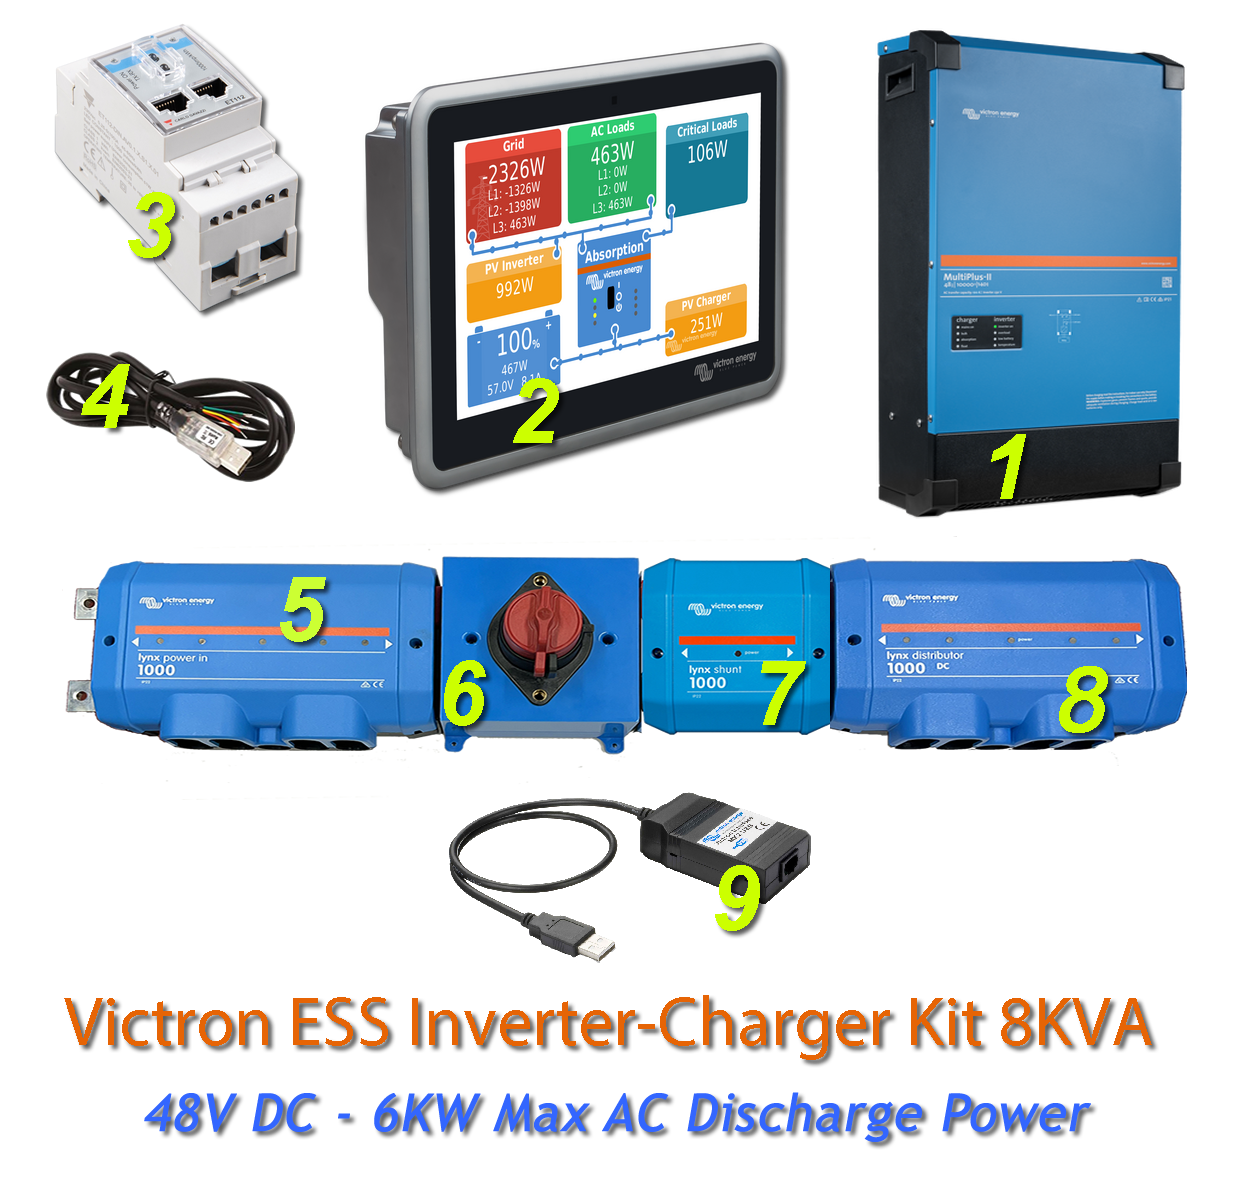 Victron Energy Multiplus II ESS Kit 48V DC - 8KW Max AC Discharge Power 140A Charging with Lynx System